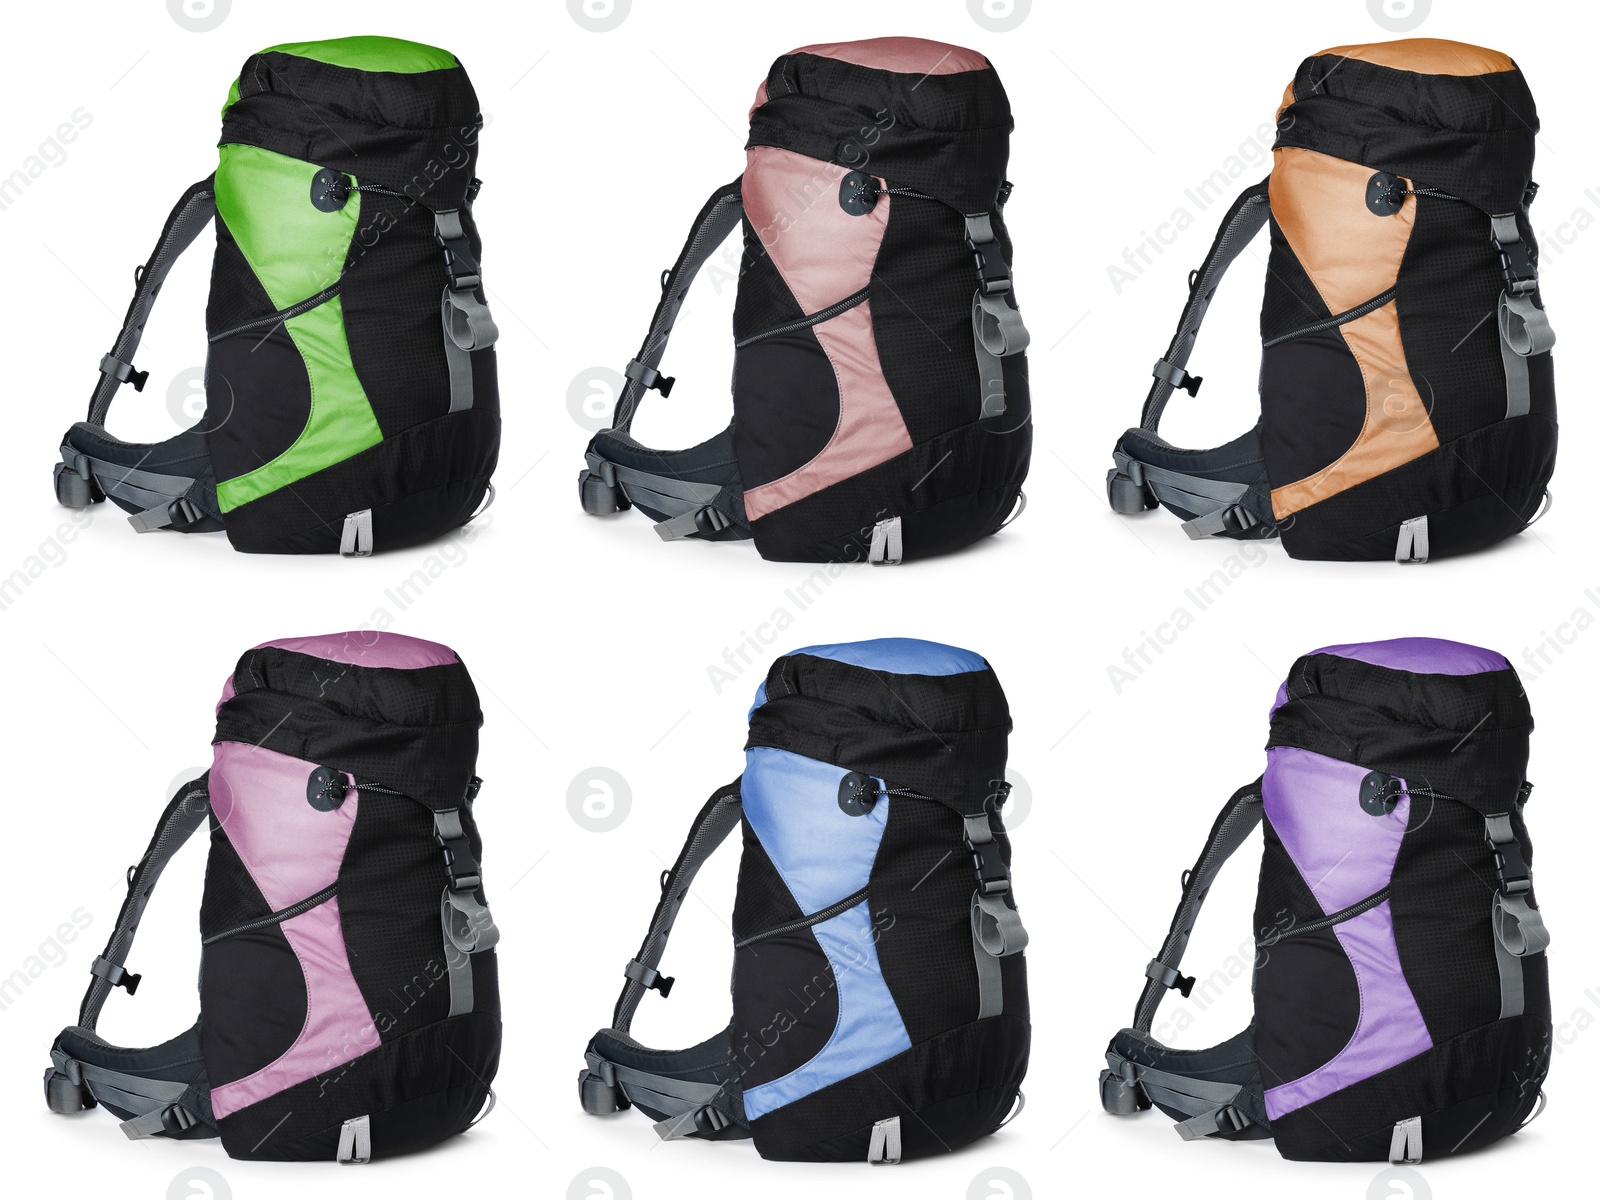 Image of Different hiking backpacks on white background, collage 